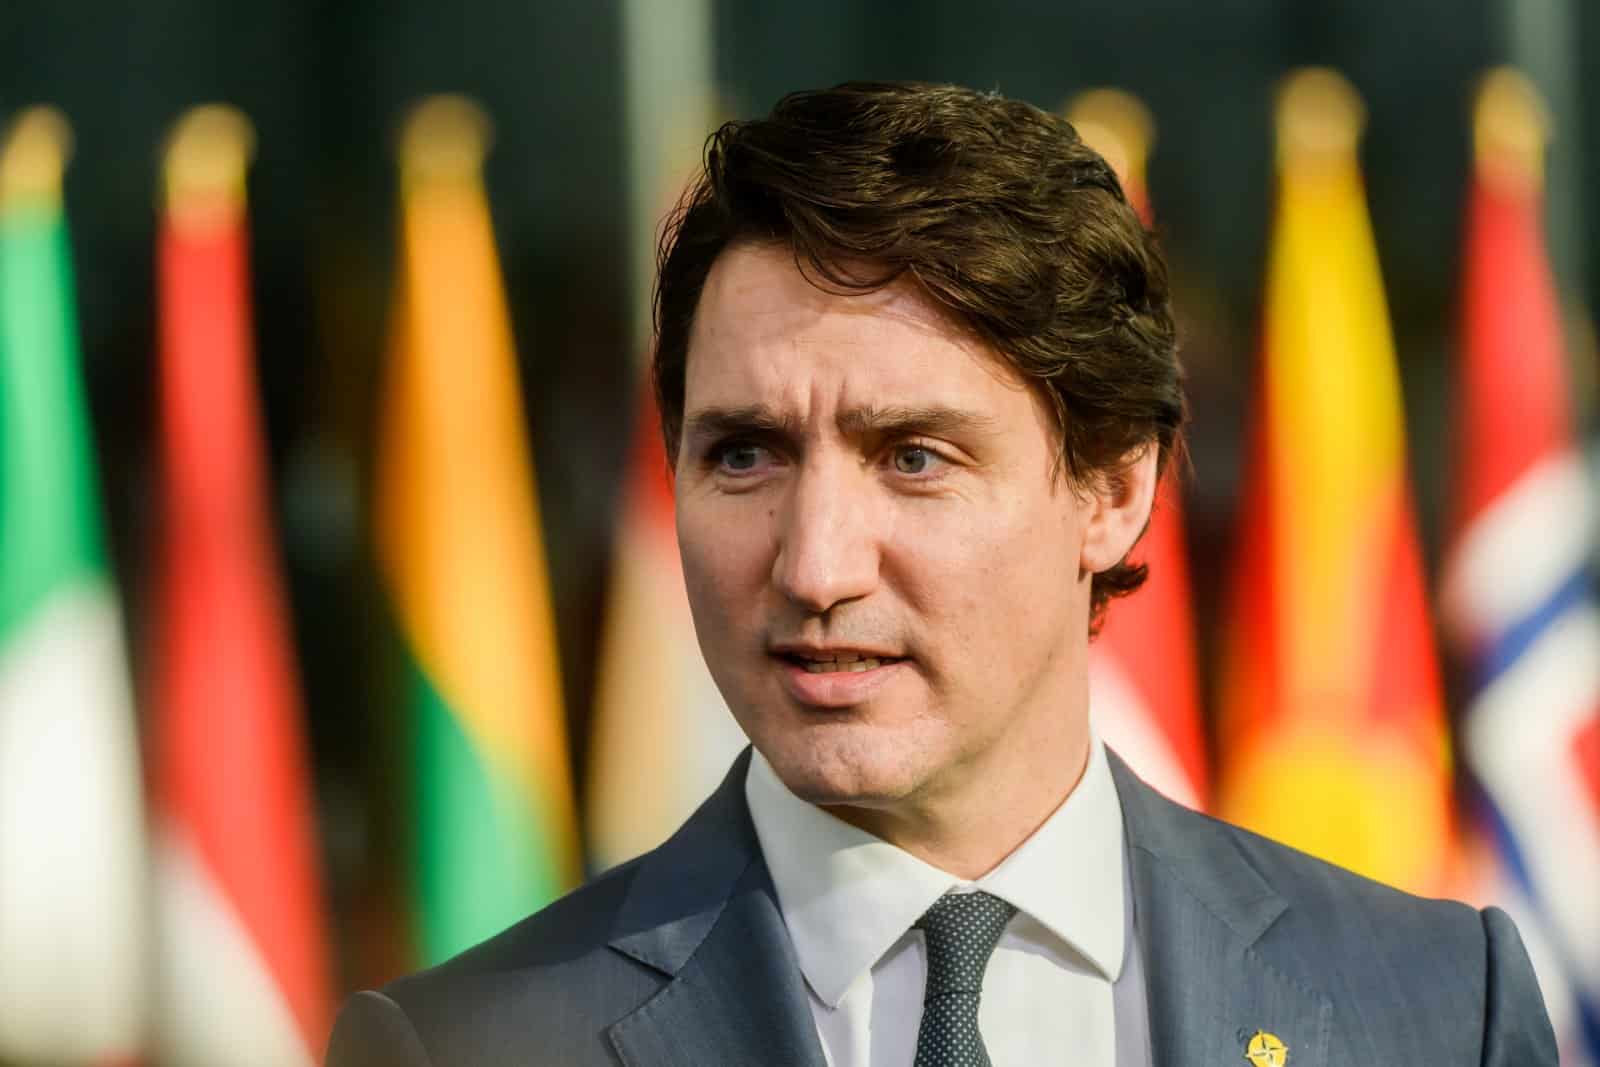 <p><span>By forming Canada’s first gender-balanced cabinet in 2015, Trudeau not only talked the feminist talk but also walked the walk, setting a new standard for political representation.</span></p>